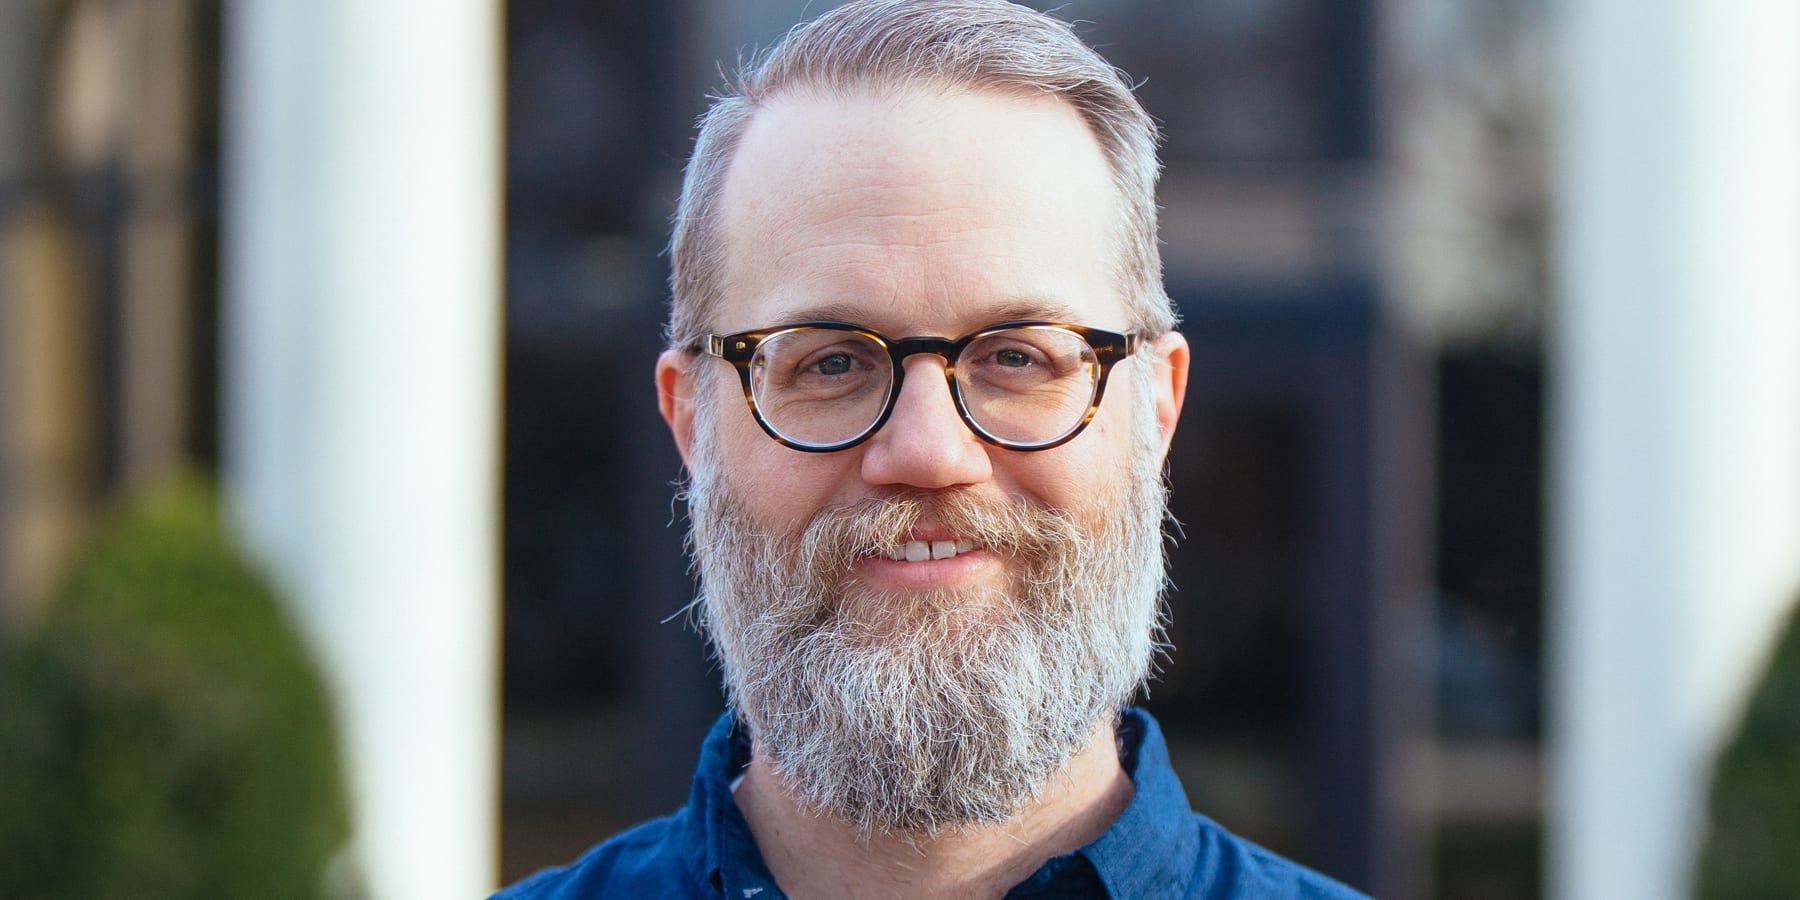 Photograph of man with beard and eyeglasses.